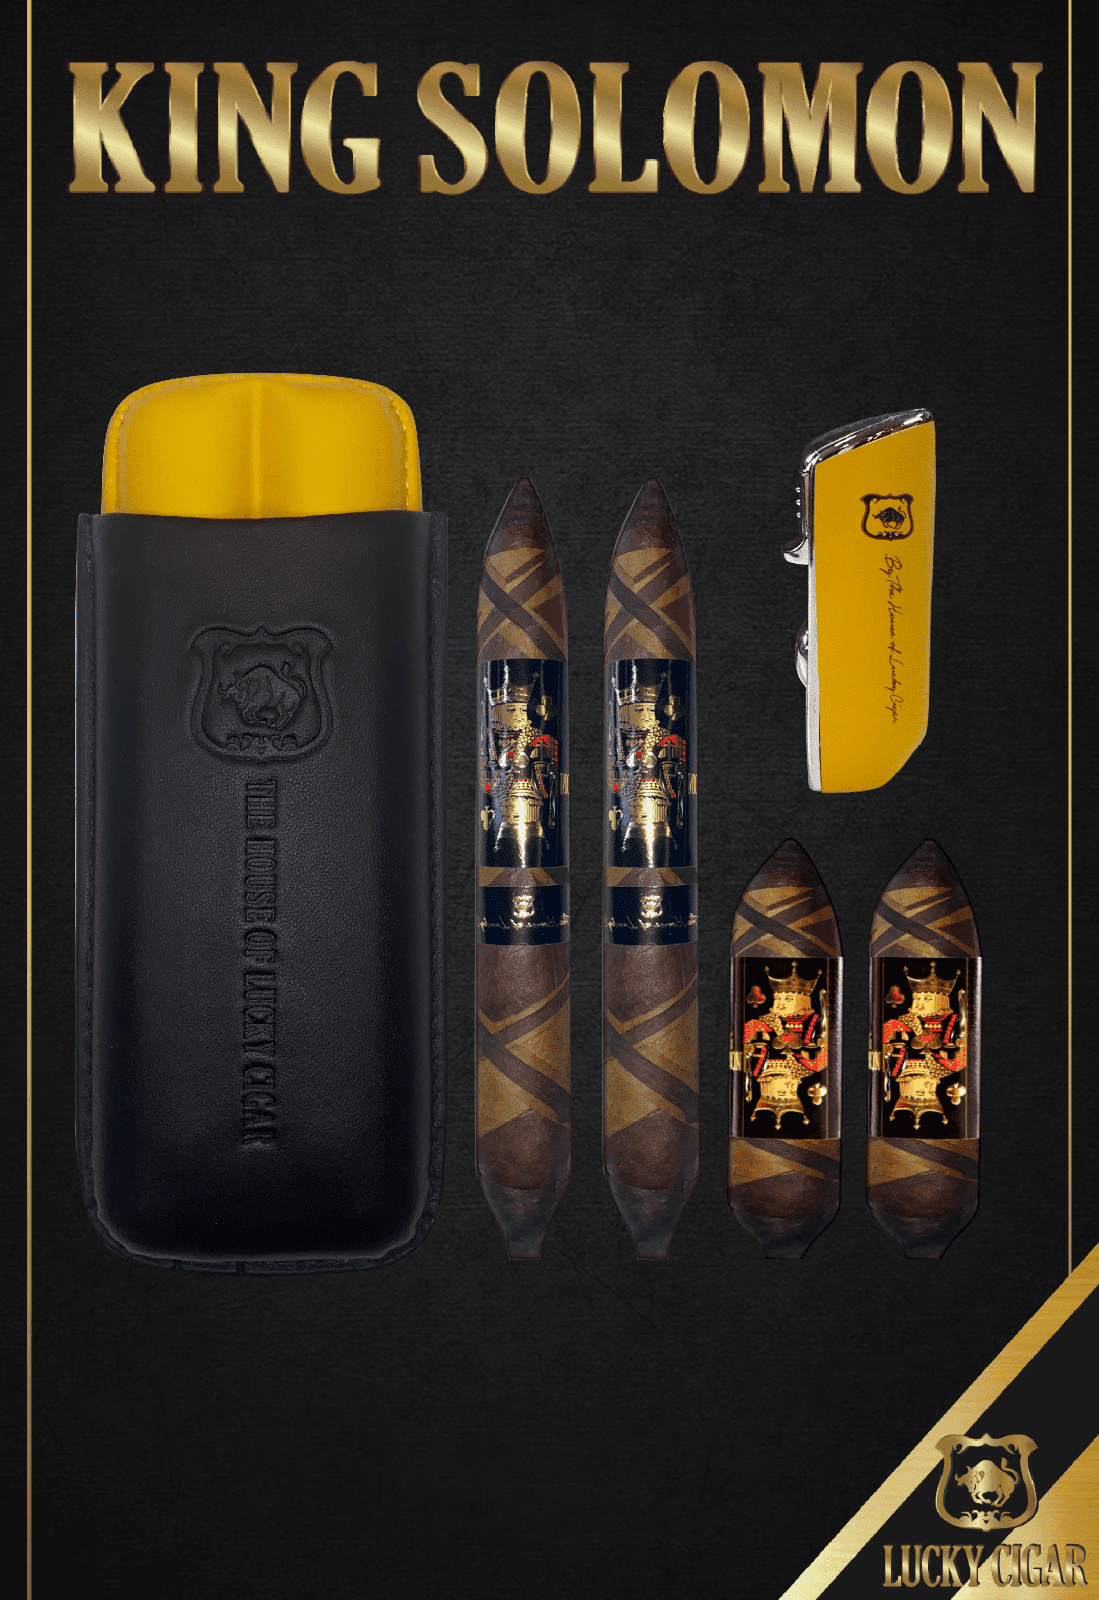 Wisdom 4x60 Cigar From The King Solomon Series: Set of 2 and 2 King Solomon 7x58 Cigar with Travel Humidor and Lighter